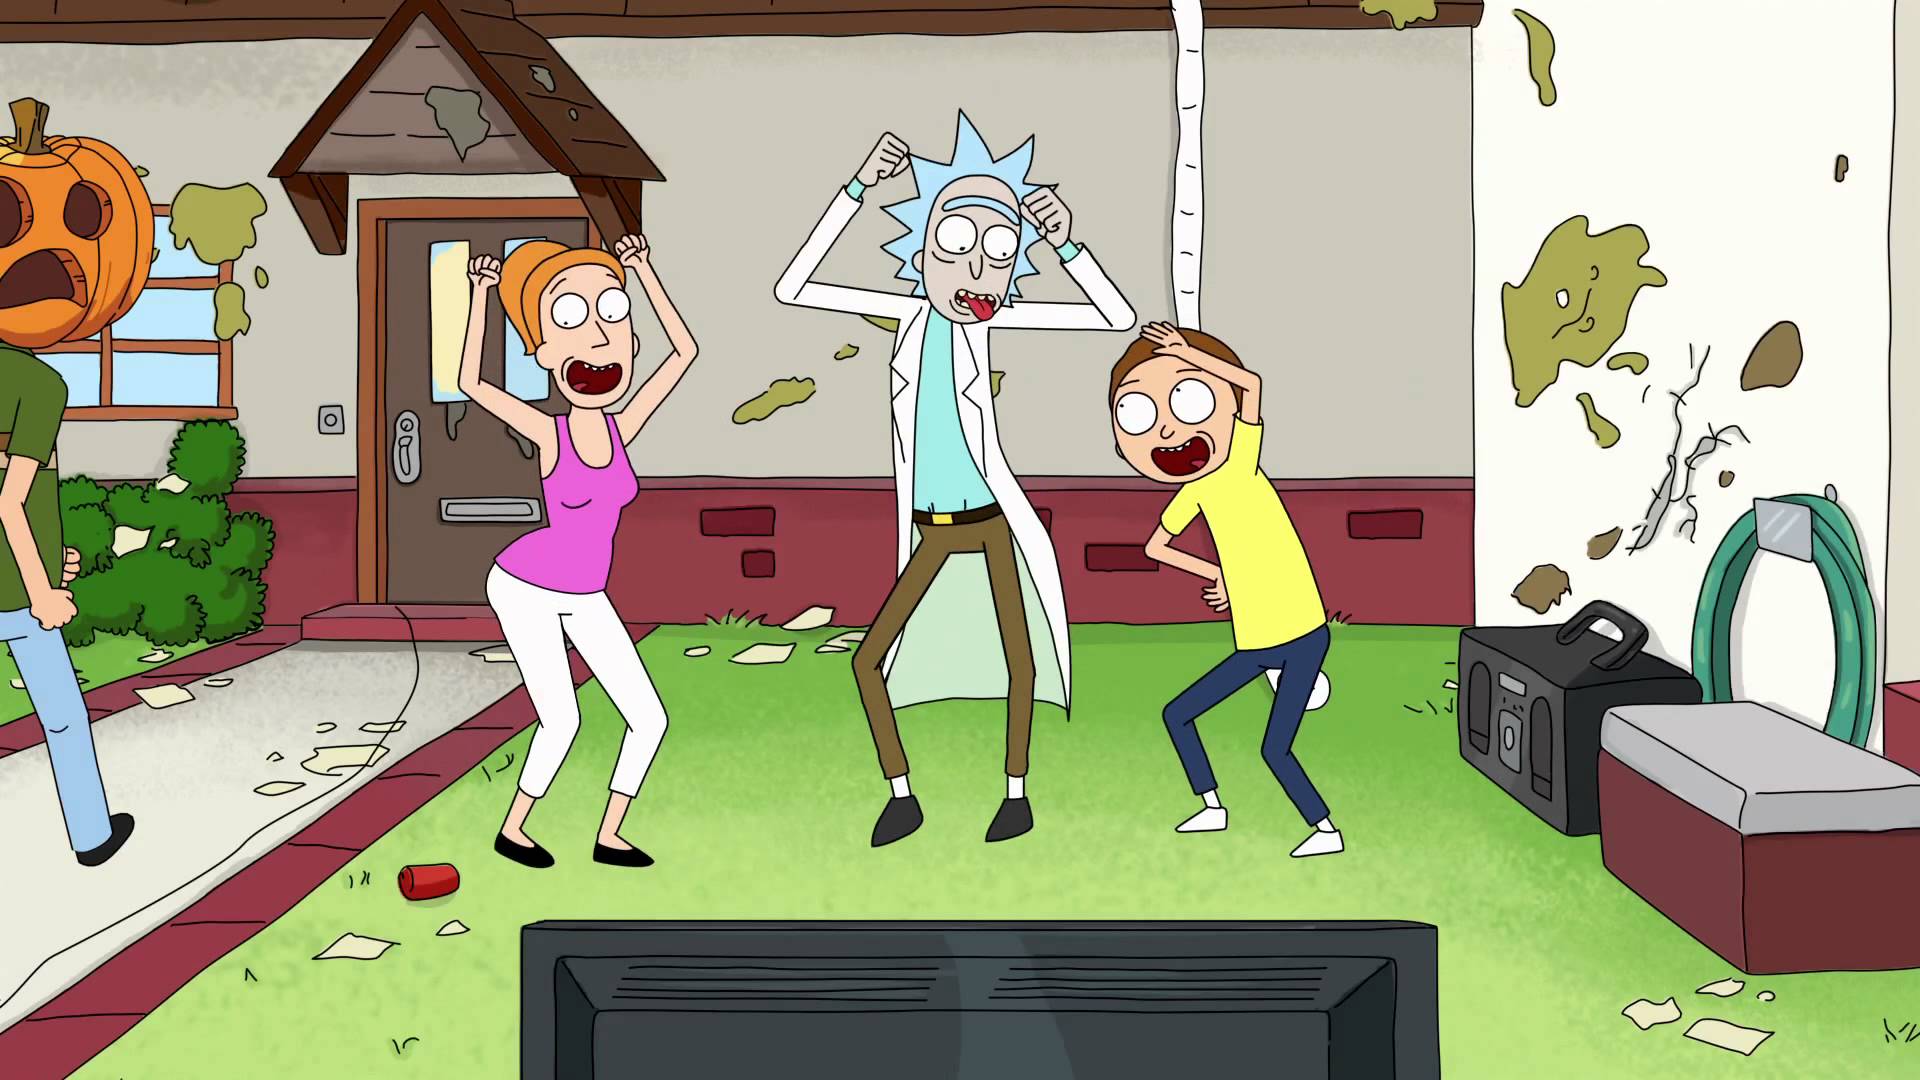 rick and morty, jerry smith, tv show, morty smith, rick sanchez, summer smith for android